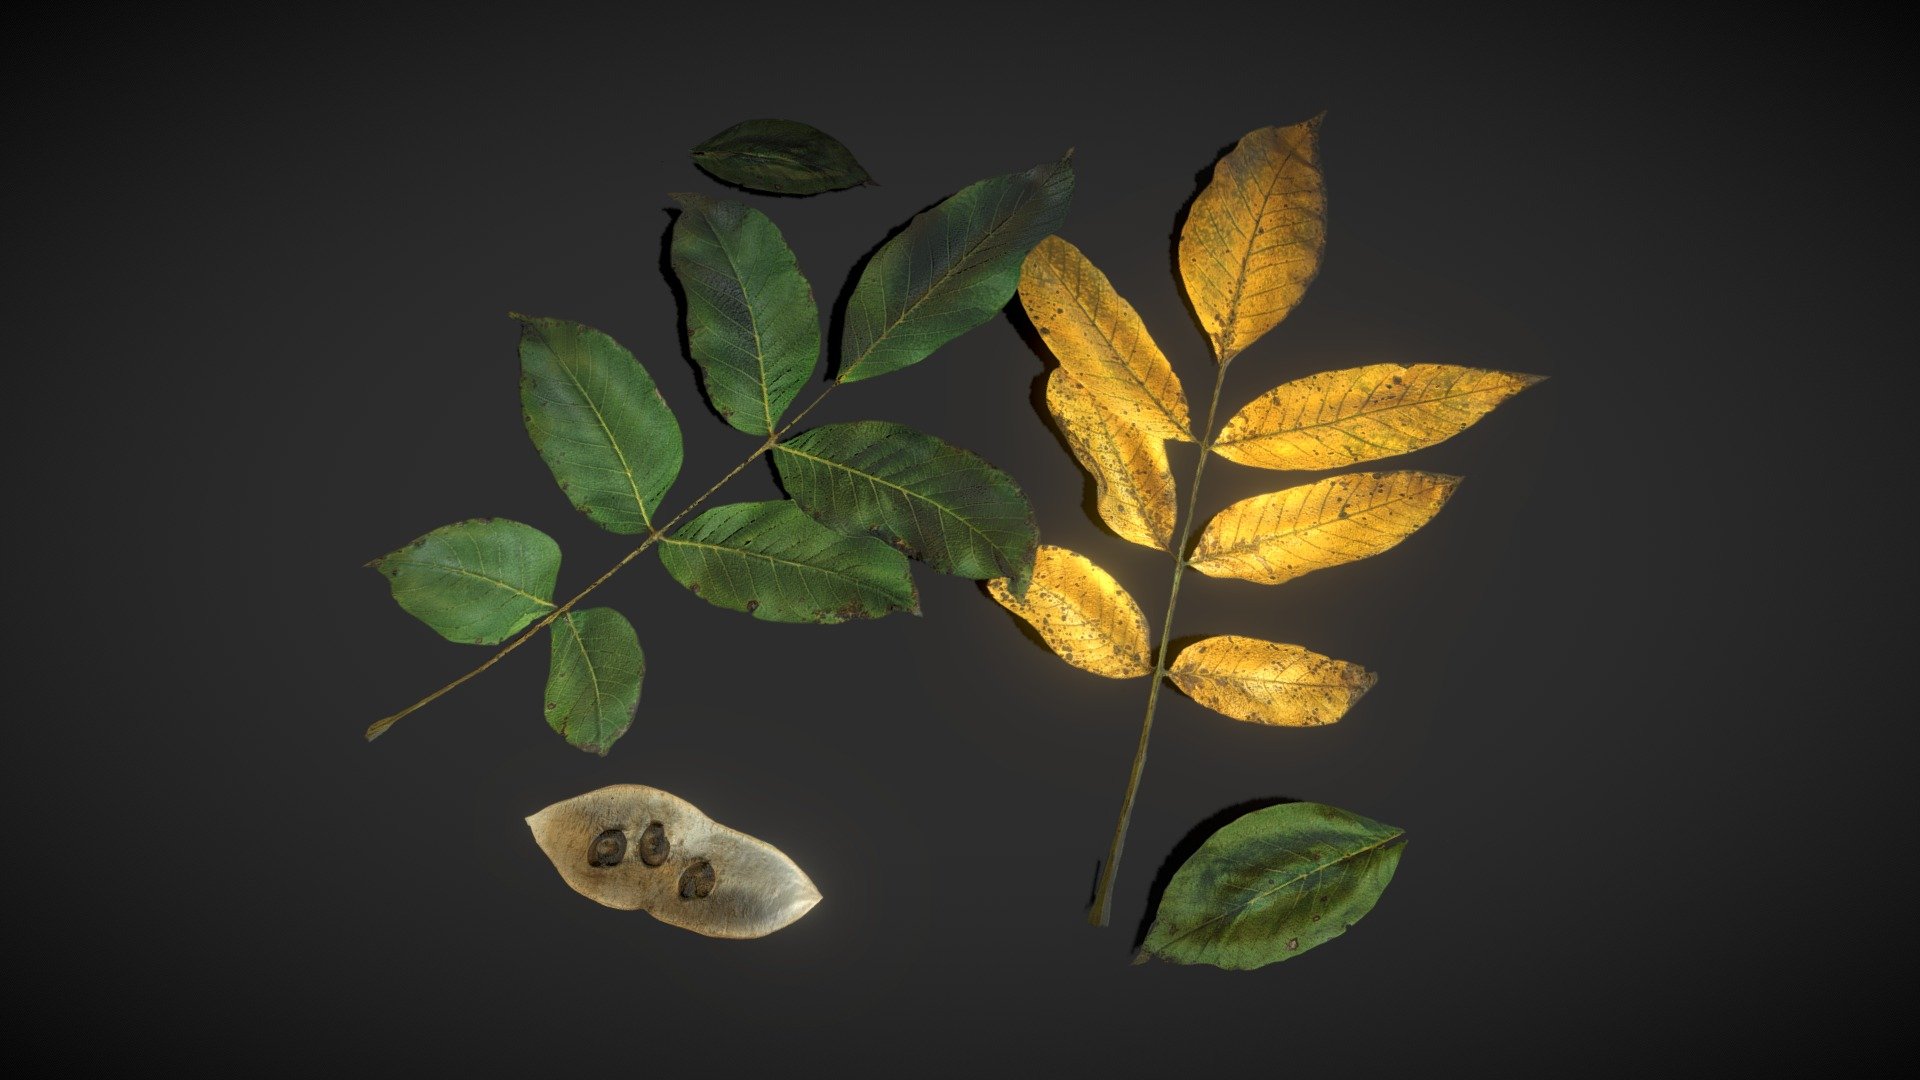 Walnut Leaves - low poly / Autumn Leaves Foliage

atlases / foliage 4096x4096 PNG texture

Textures include:




Base Color

Normal

Roughness

Opacity

AO

Triangles: 66
Vertices: 64 - Walnut Leaves - low poly - Buy Royalty Free 3D model by Karolina Renkiewicz (@KarolinaRenkiewicz) 3d model